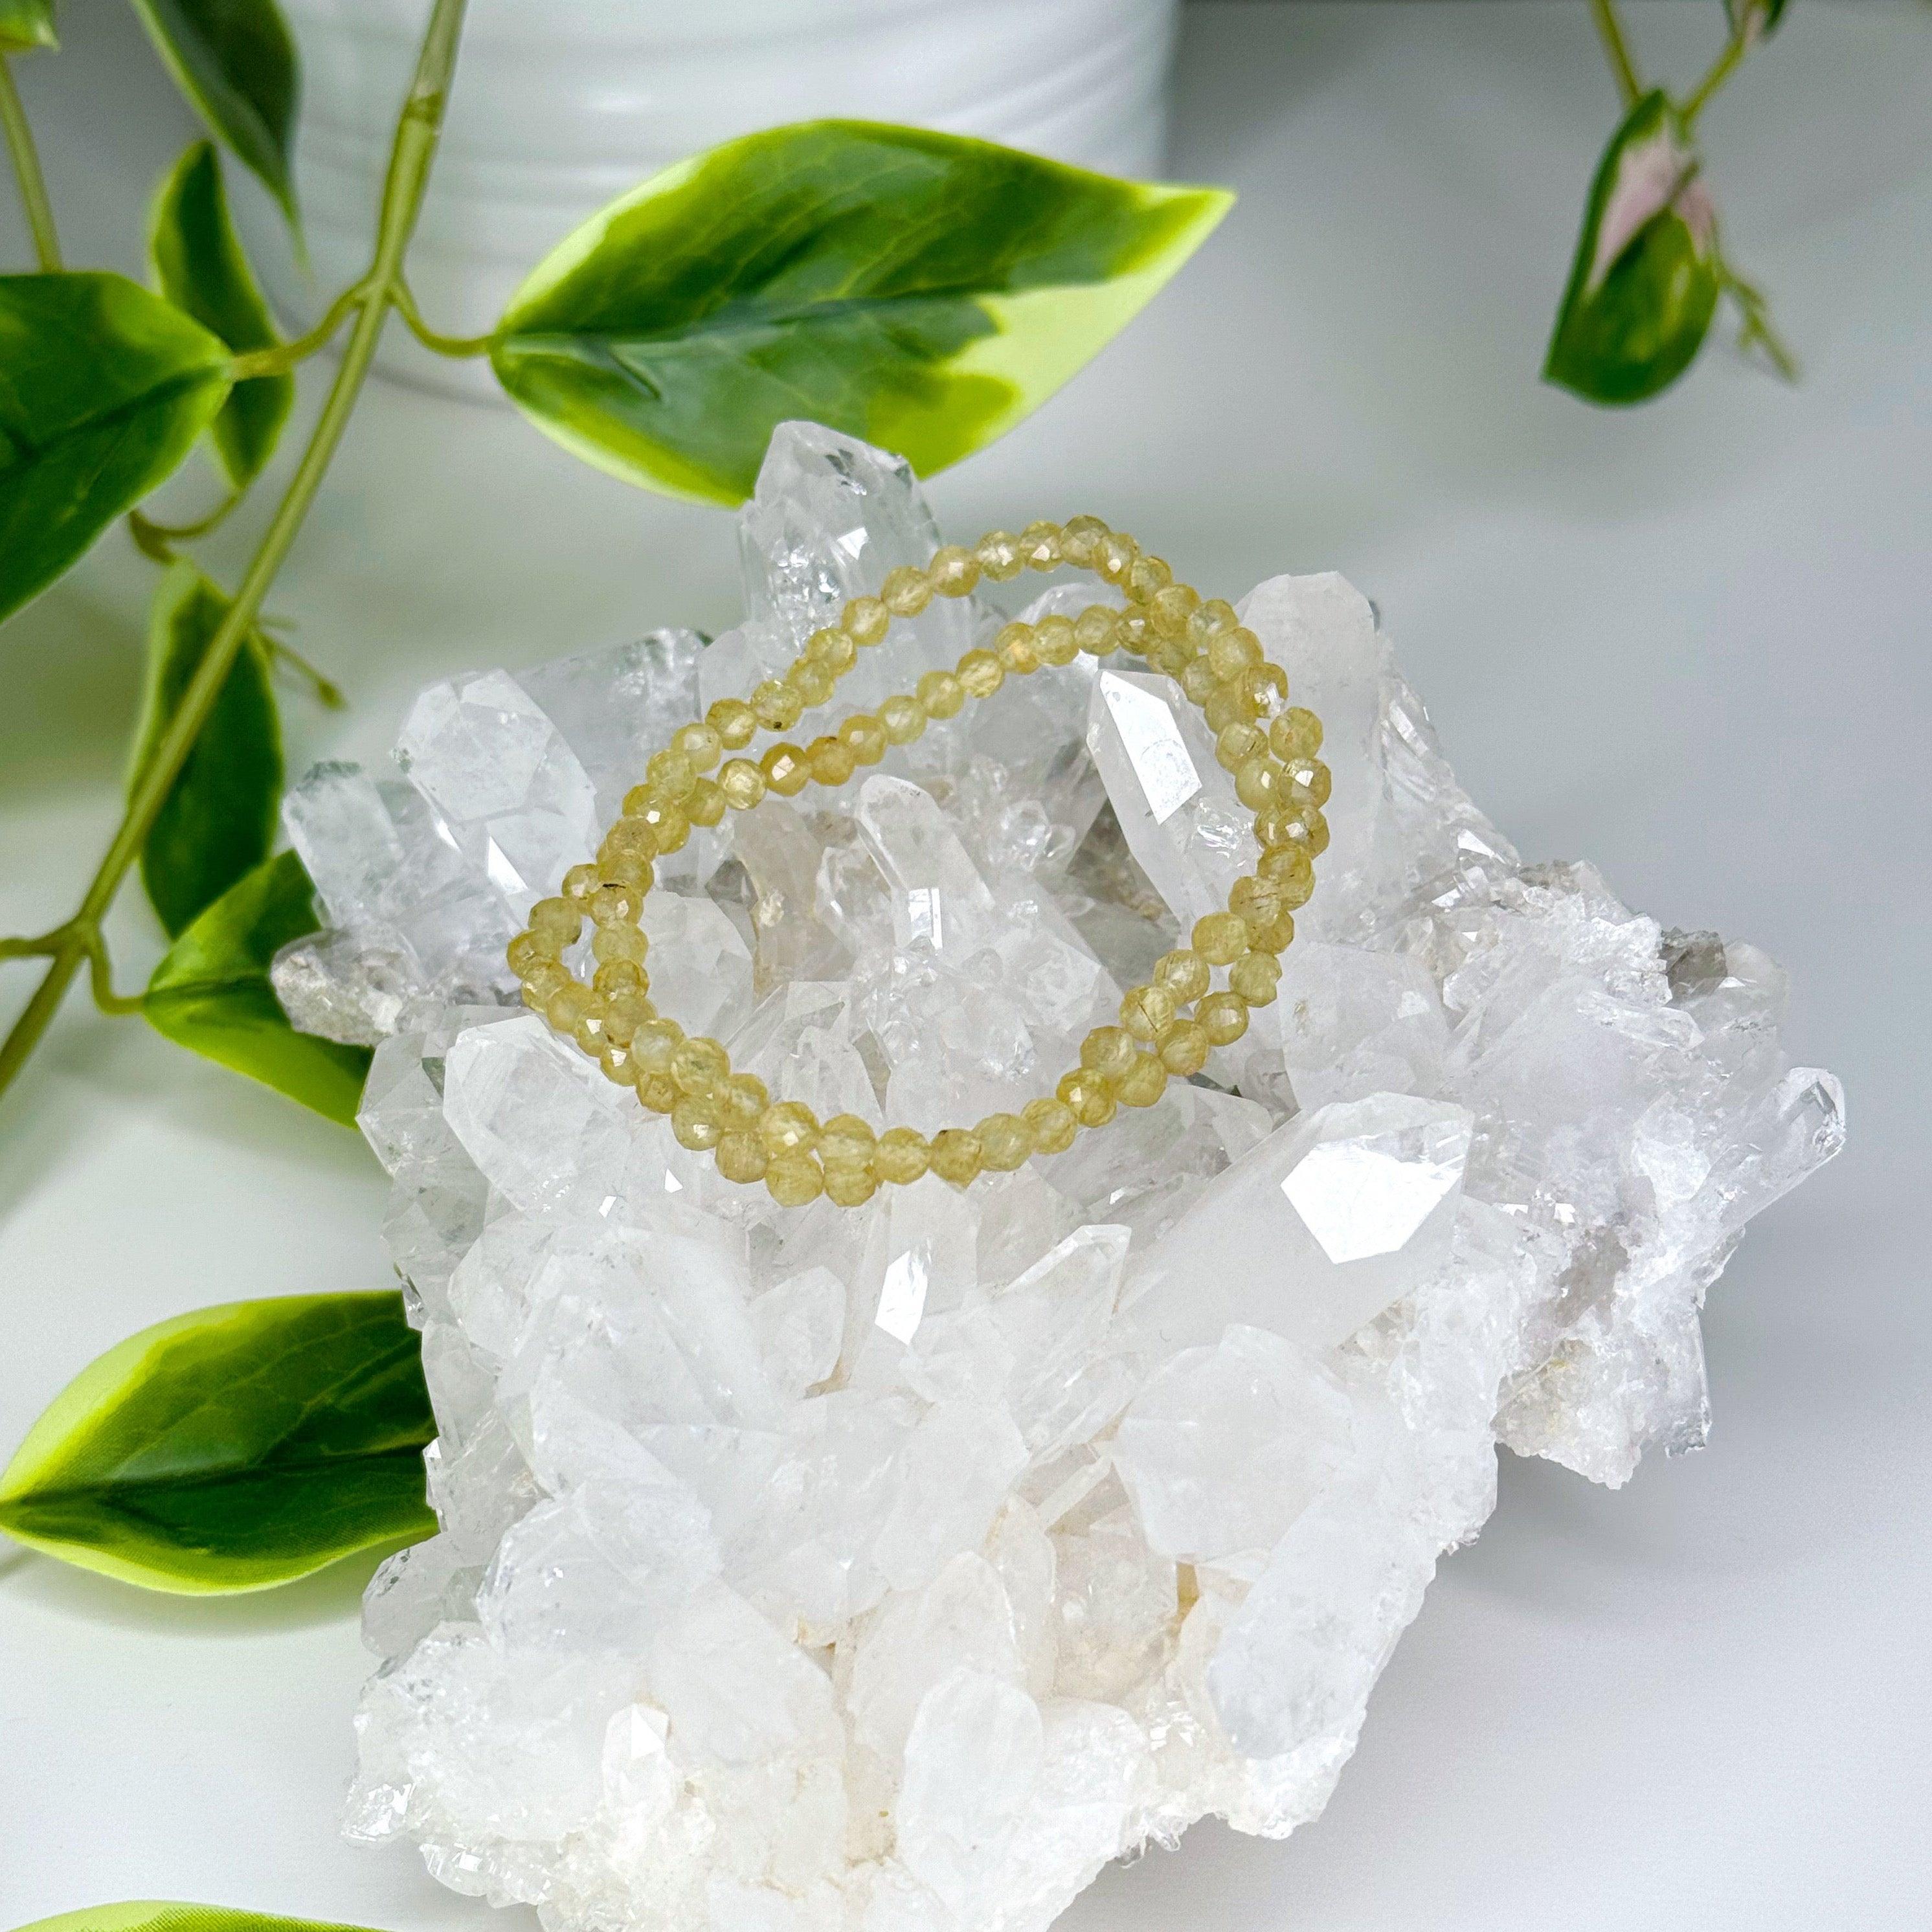 GOLDEN APATITE (FACETED) 4mm - HANDMADE CRYSTAL BRACELET - air, apatite, bracelet, crystal bracelet, golden apatite, handmade bracelet, jewelry, recently added, spring collection, springtime, water, Wearable, yellow - The Mineral Maven